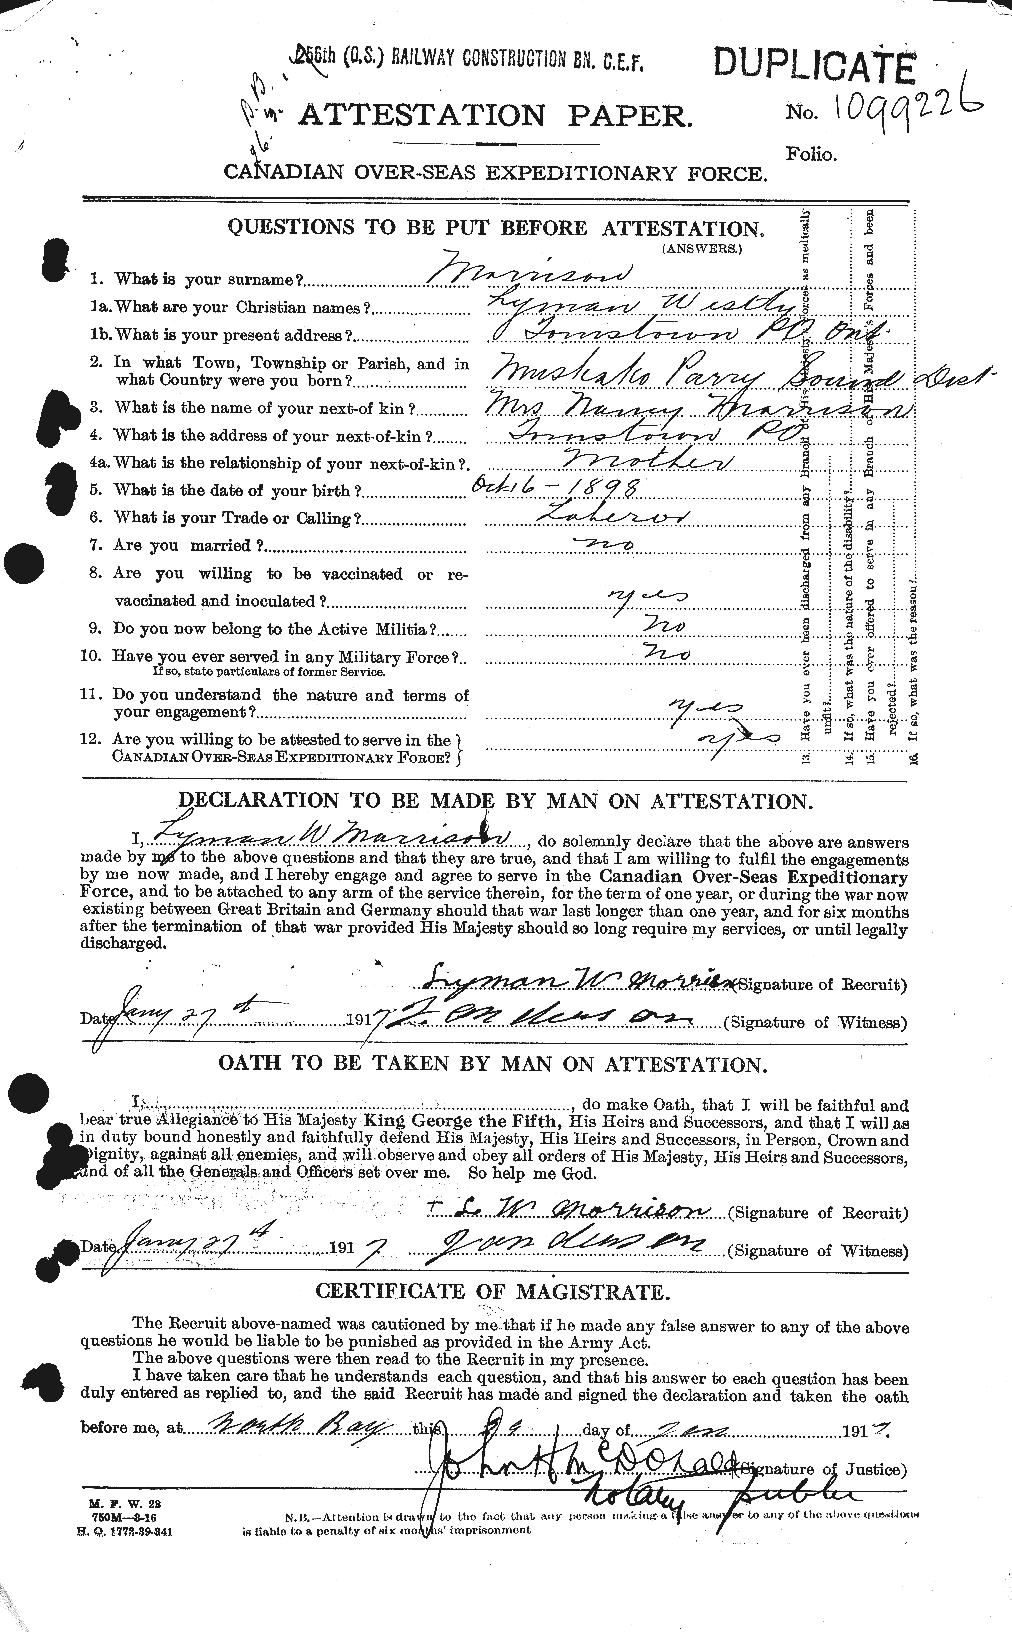 Personnel Records of the First World War - CEF 507148a